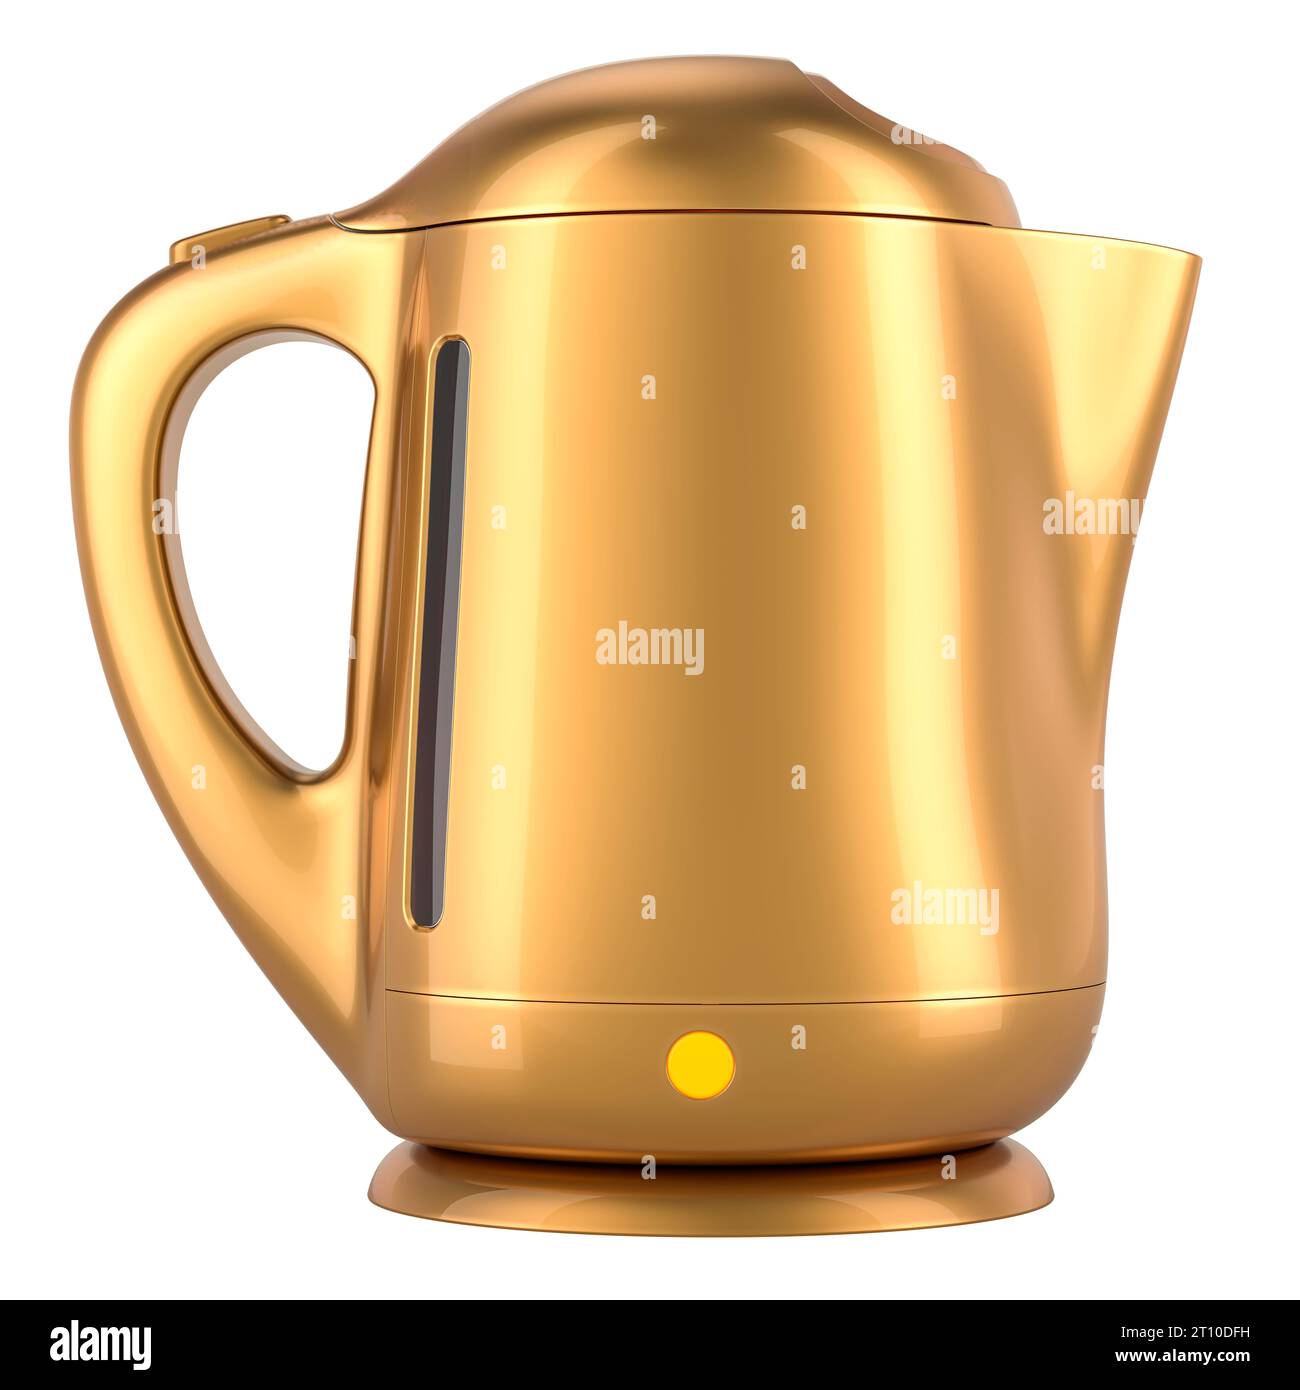 https://c8.alamy.com/comp/2T10DFH/golden-electric-tea-kettle-3d-rendering-isolated-on-white-background-2T10DFH.jpg